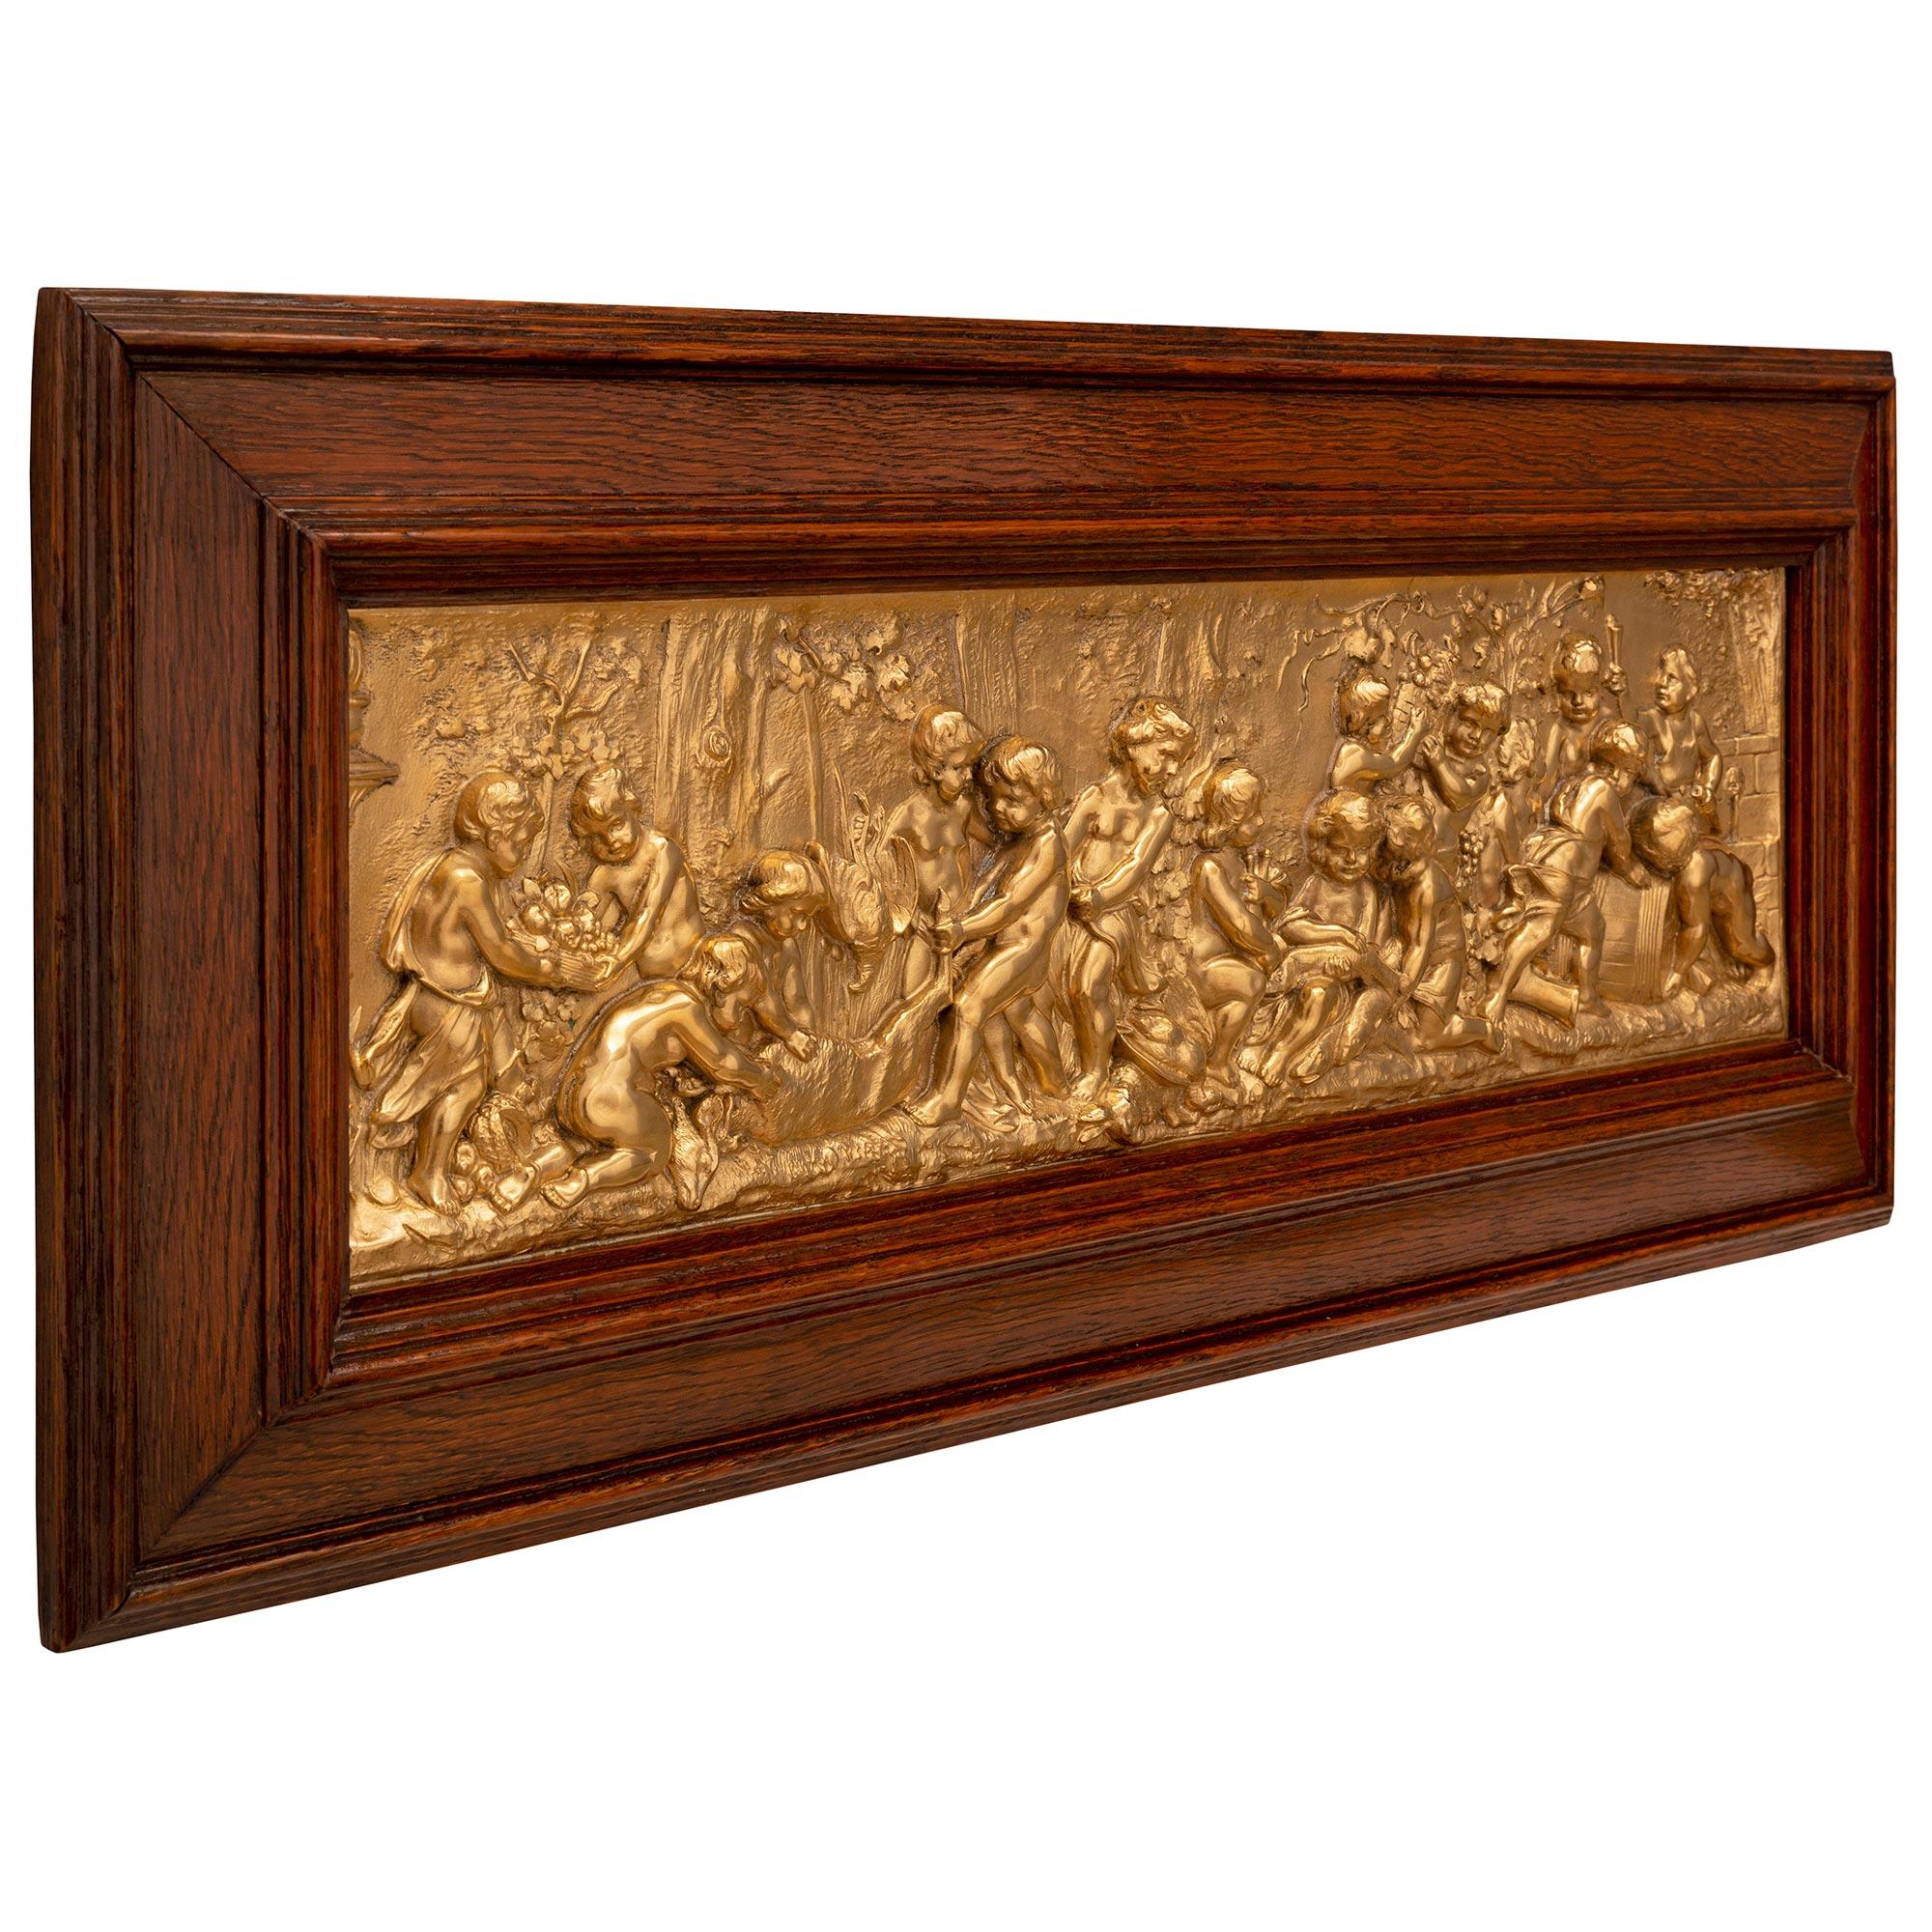 A stunning and most decorative German 19th century Louis XVI st. ormolu and Oak wall decor plaque signed Gustav Grohe. The wonderfully executed and exquisitely detailed ormolu plaque depicts charming Bacchanalian cherubs preparing the spoils of